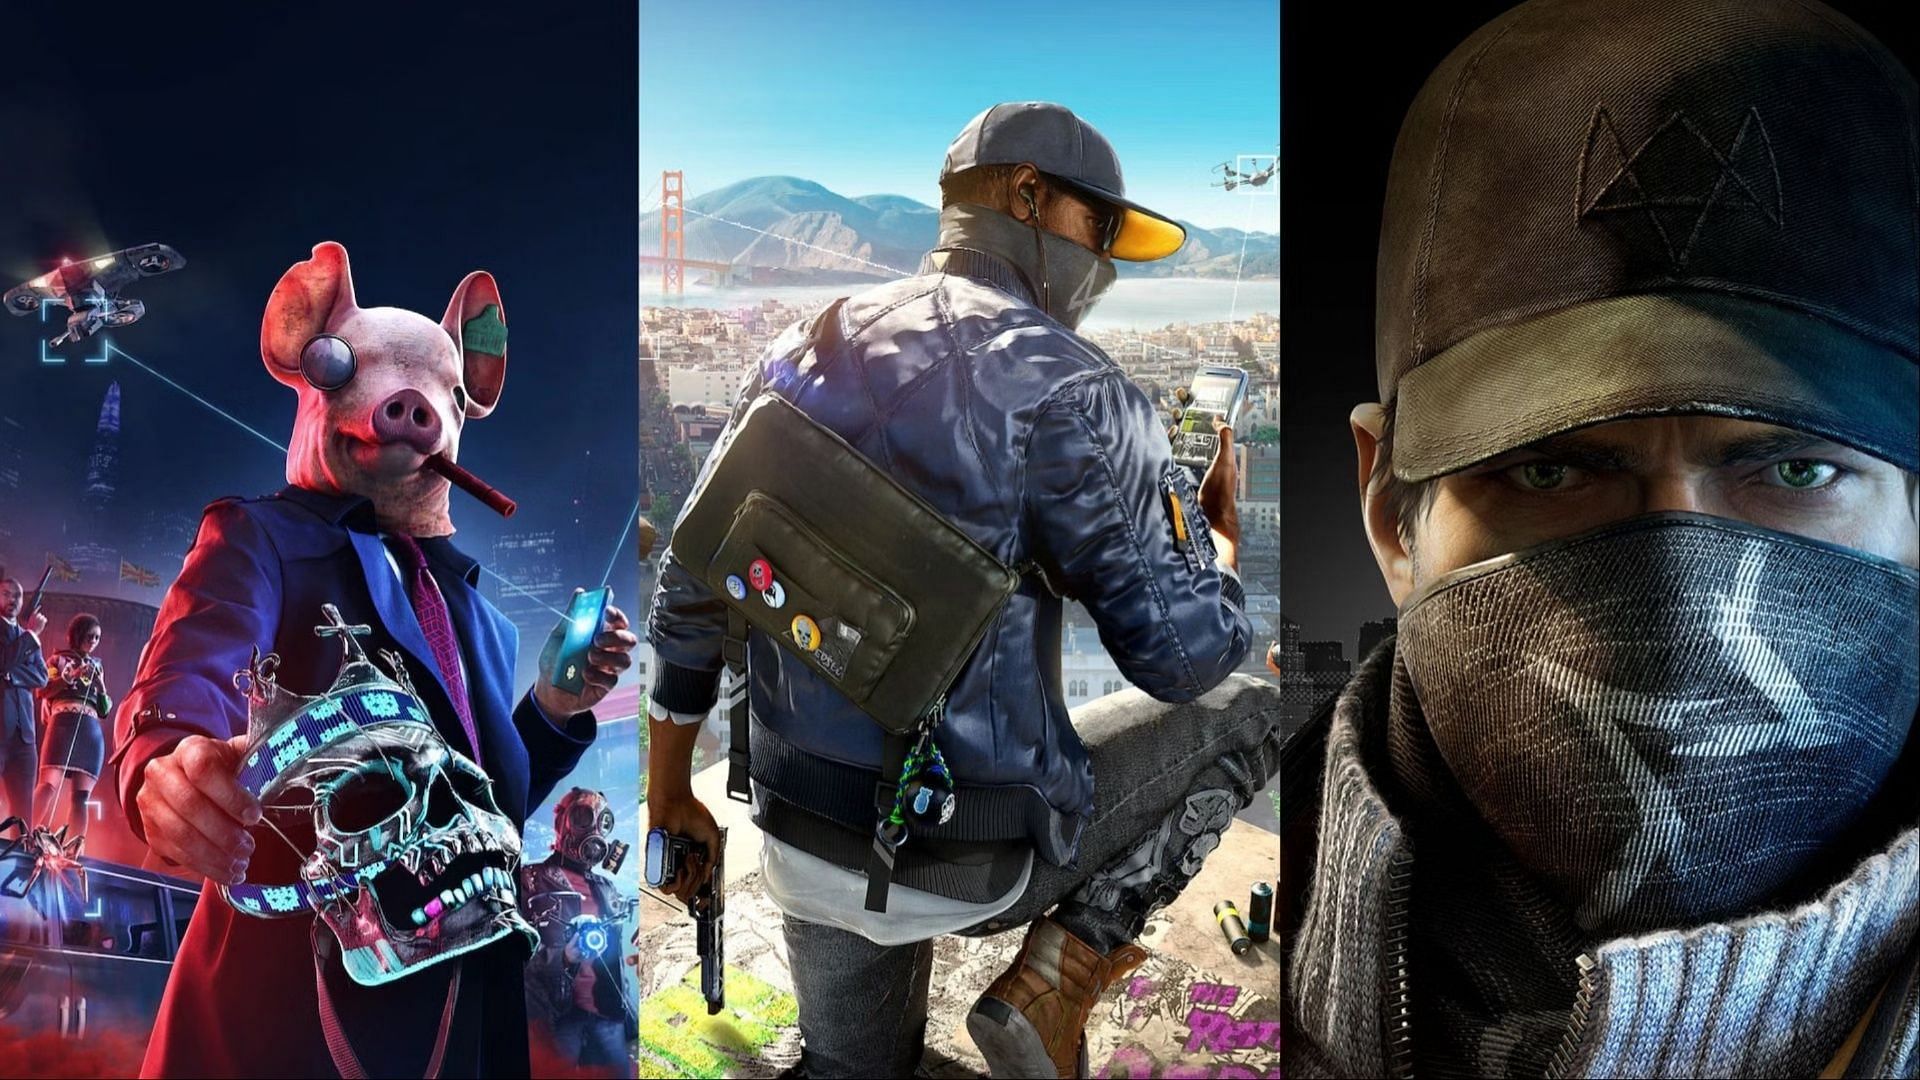 Watch Dogs games are one of the most inventive series in Ubisoft